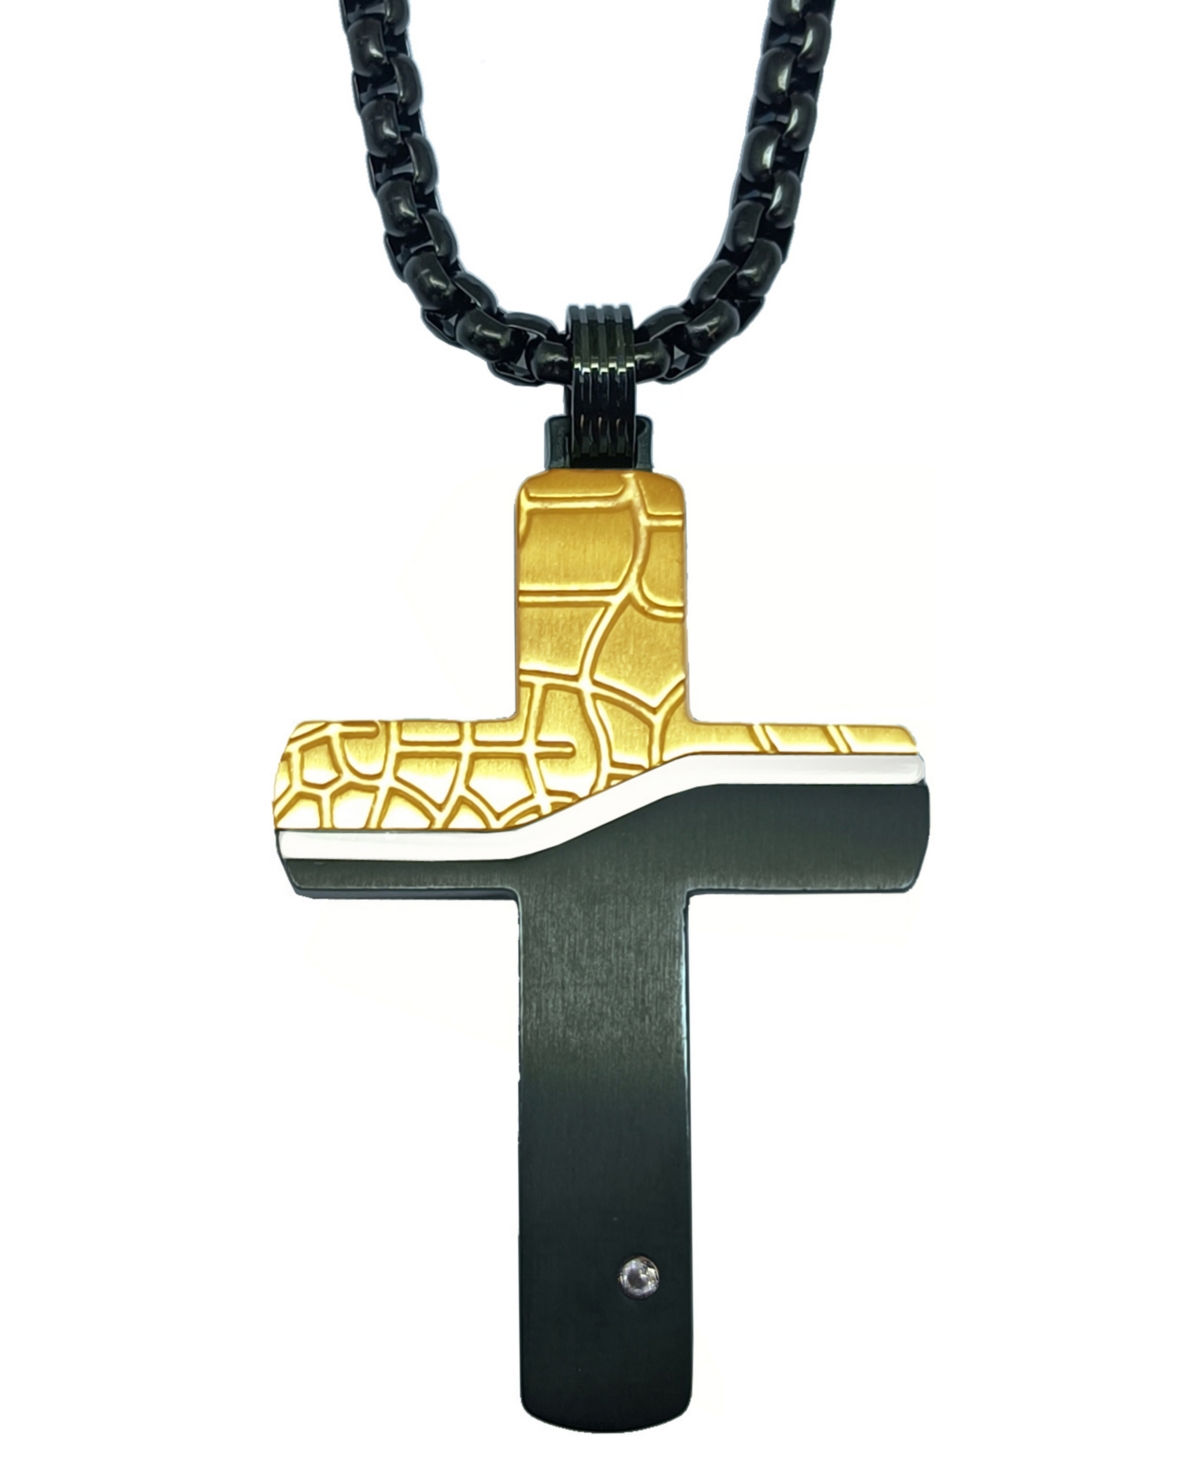 Diamond Accent Two-Tone Cross 22" Pendant Necklace in Black- & Gold-Tone Ion-Plated Stainless Steel, Created for Macy's - Black